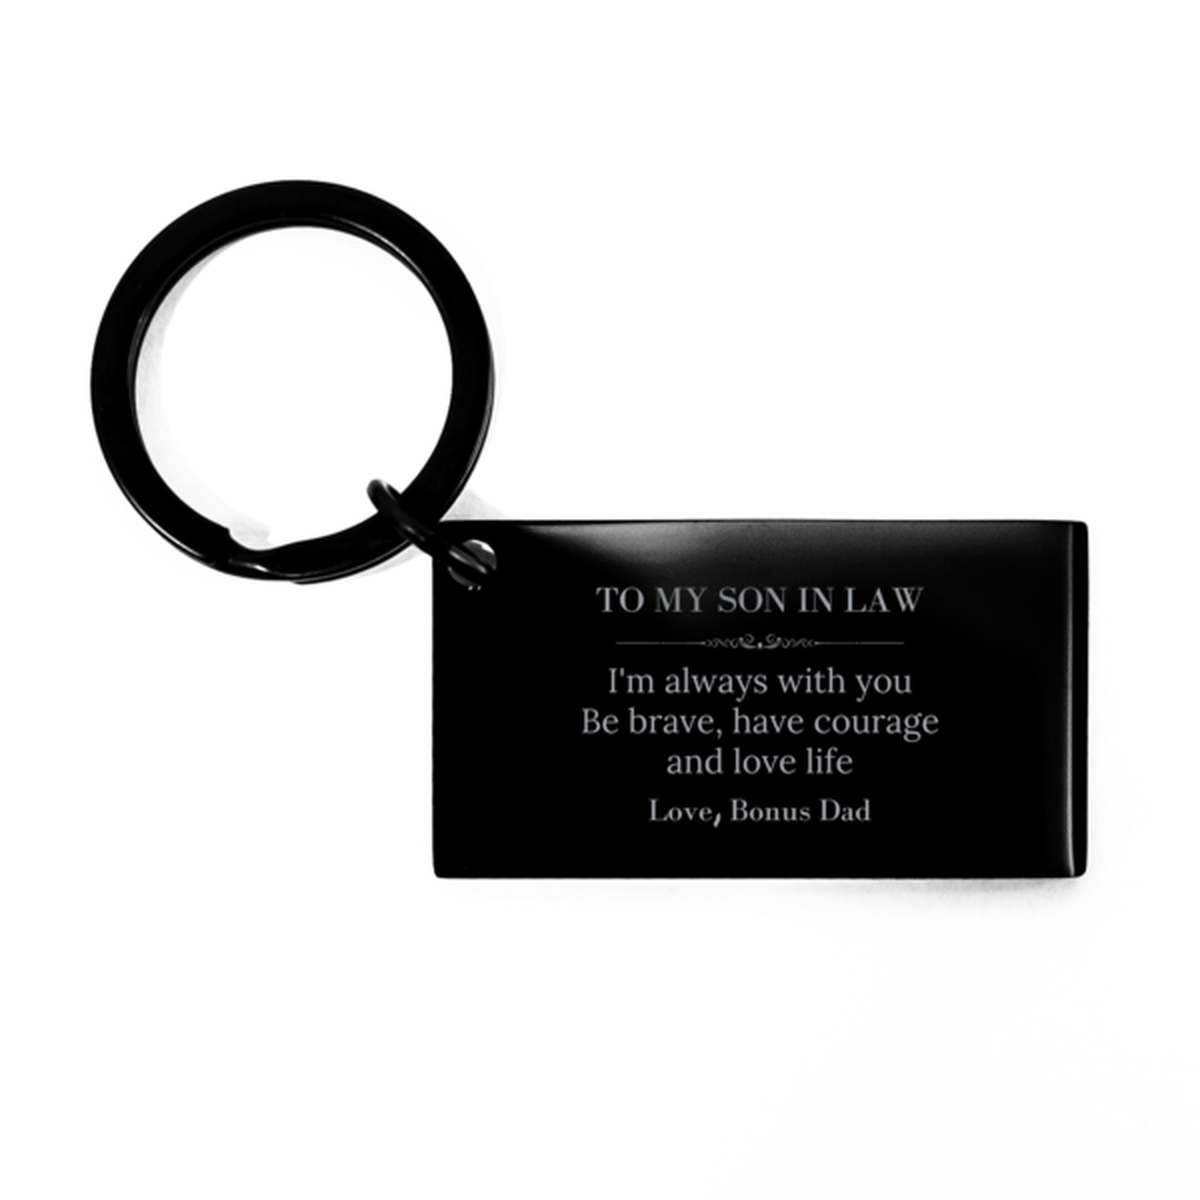 To My Son In Law Gifts from Bonus Dad, Unique Keychain Inspirational Christmas Birthday Graduation Gifts for Son In Law I'm always with you. Be brave, have courage and love life. Love, Bonus Dad